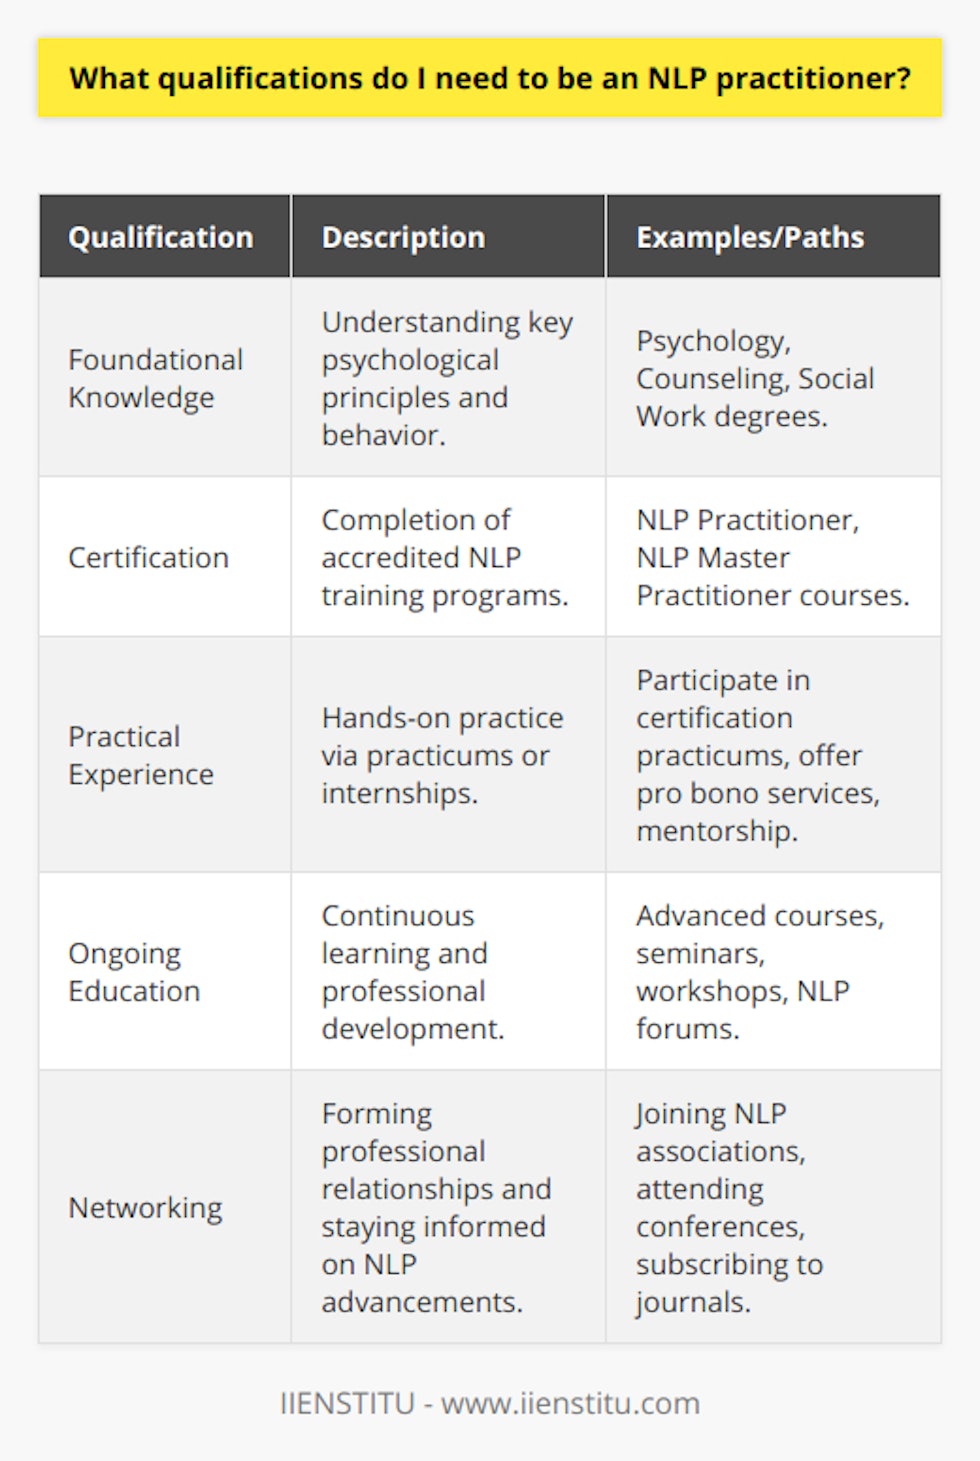 Becoming an NLP (Neuro-Linguistic Programming) practitioner is an enticing career path for those interested in the symbiotic relationship between neurological processes, language, and personal behaviors. NLP enables practitioners to help individuals make significant life changes by altering their thought patterns and linguistic constructs. Here are the qualifications and steps you should consider to pursue this profession successfully:**Foundational Knowledge in Psychology or Related Fields**While not strictly required, a strong foundational understanding of human psychology and behavior can be significantly beneficial. Degrees in psychology, counseling, social work, or a related field provide an understanding of the principles that underpin NLP, such as behavioral psychology, linguistics, and how individuals process their experiences.**Certification through Accredited NLP Training**The cornerstone of becoming a recognized NLP practitioner is to obtain certification from an accredited NLP training program. Courses typically range from the foundational level to more advanced, with titles such as NLP Practitioner and NLP Master Practitioner. These courses should cover:- The history and foundation of NLP- Techniques for effective communication and rapport building- Strategies for changing behaviors and thought processes- Methods for setting and achieving goalsA quality educational institution, such as IIENSTITU, provides certified NLP courses that adhere to the industry standards. Look for programs that are well-reviewed by past students and endorsed by professional NLP organizations.**Gaining Practical Experience**Practical experience is crucial in NLP. To acquire this, you might:- Participate in practicums or internships as part of your NLP certification course- Offer pro bono services to gain experience and testimonials- Work with a mentor who can provide guidance and feedback on your techniquesPractical experience allows you to apply what you've learned in a controlled environment, facilitating the transition to working independently with clients.**Ongoing Education and Networking**The field of NLP is dynamic, with new theories and techniques continually emerging. To stay relevant as an NLP practitioner, you should:- Engage in lifelong learning through ongoing coursework, seminars, and workshops- Join professional networks and NLP forums to discuss ideas and challenges- Stay updated with recent research and publications related to NLPAn active engagement in the NLP community through continuous professional development will not only affirm your dedication but also keeps your practice innovative and effective.By acquiring a solid educational foundation, certifying through an accredited program, gaining practical experience, and committing to ongoing development, you can become a qualified NLP practitioner capable of facilitating powerful changes in your clients' lives. Remember that the quality of your training and experience is what sets you apart in the field of NLP, allowing you to deliver exceptional value to those you work with.